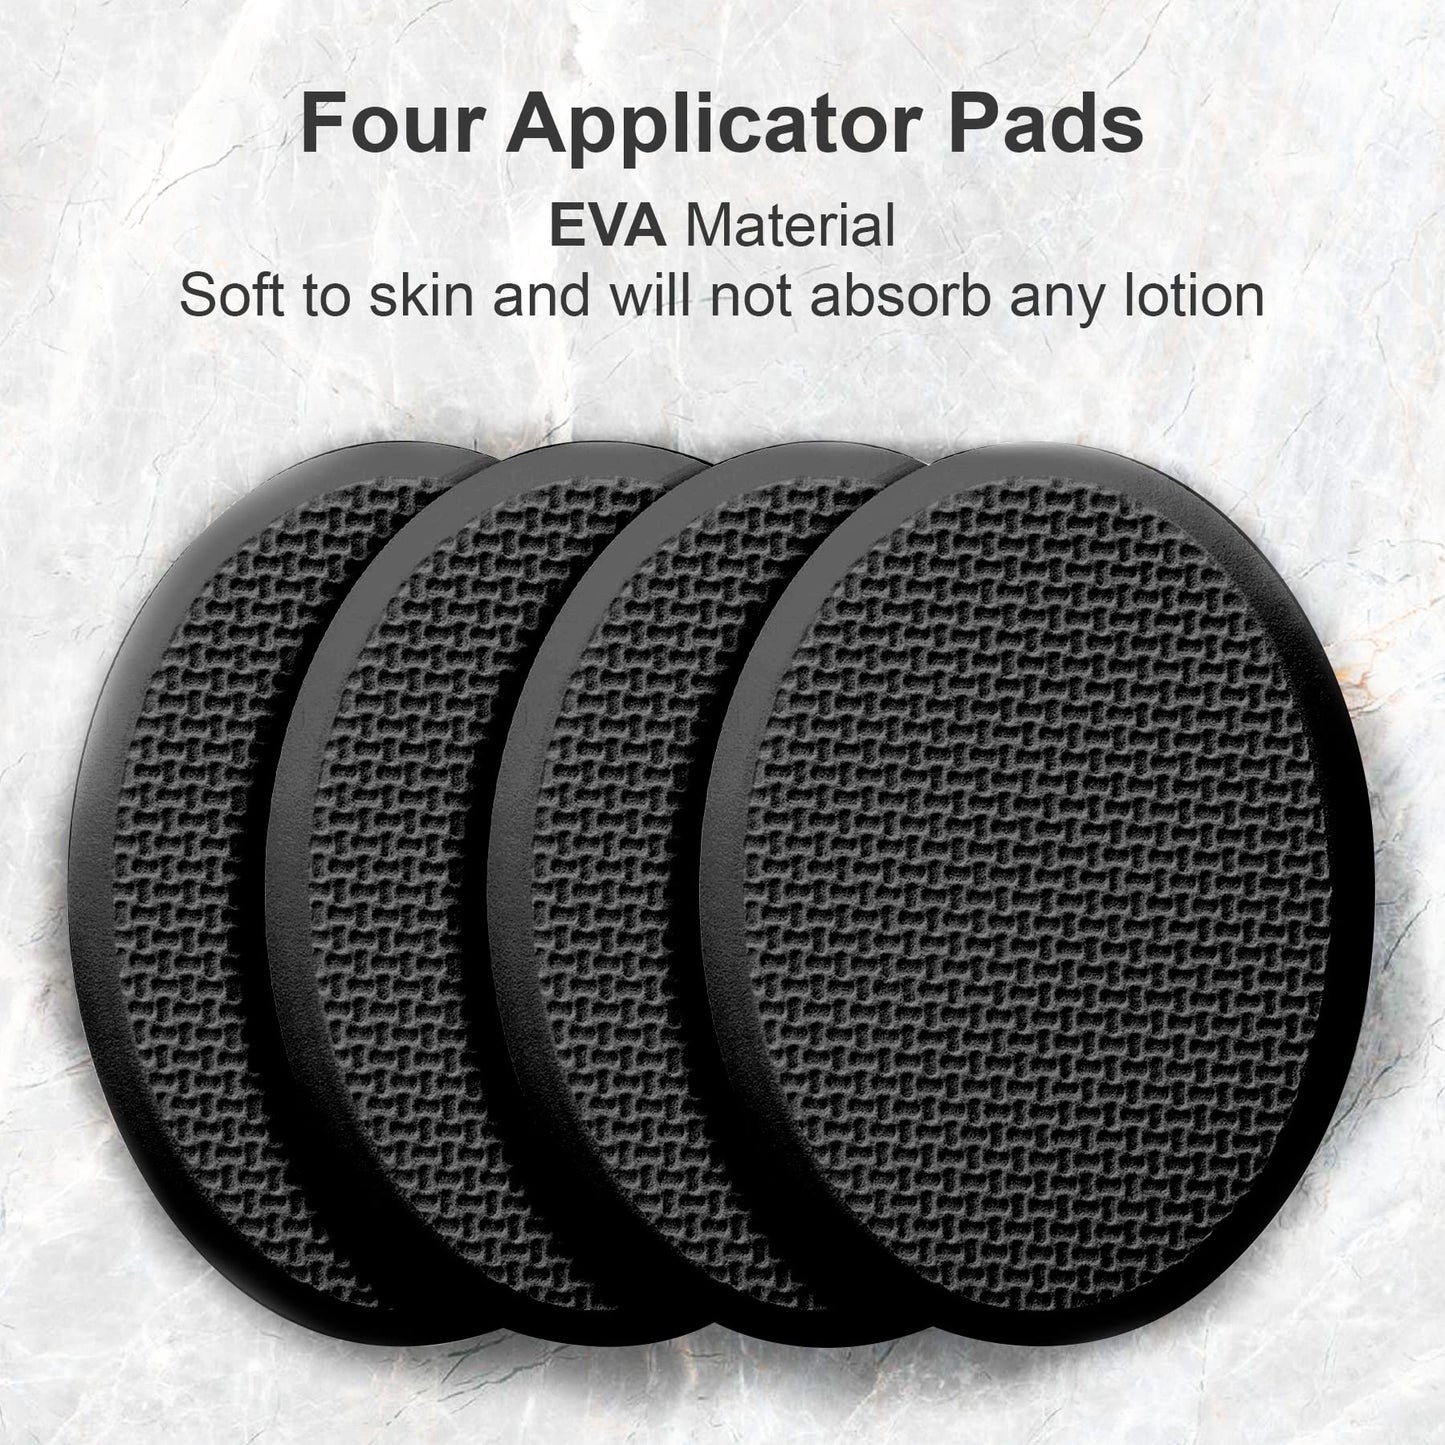 AmazerBath Lotion Applicator for Back, Feet, 4 Replaceable Pads with 1 Long Handled, Back Lotion Applicator for Elderly, Women, Apply Cream Medicine Skin Cream Moisturizer Sunscreen Tanner, Black